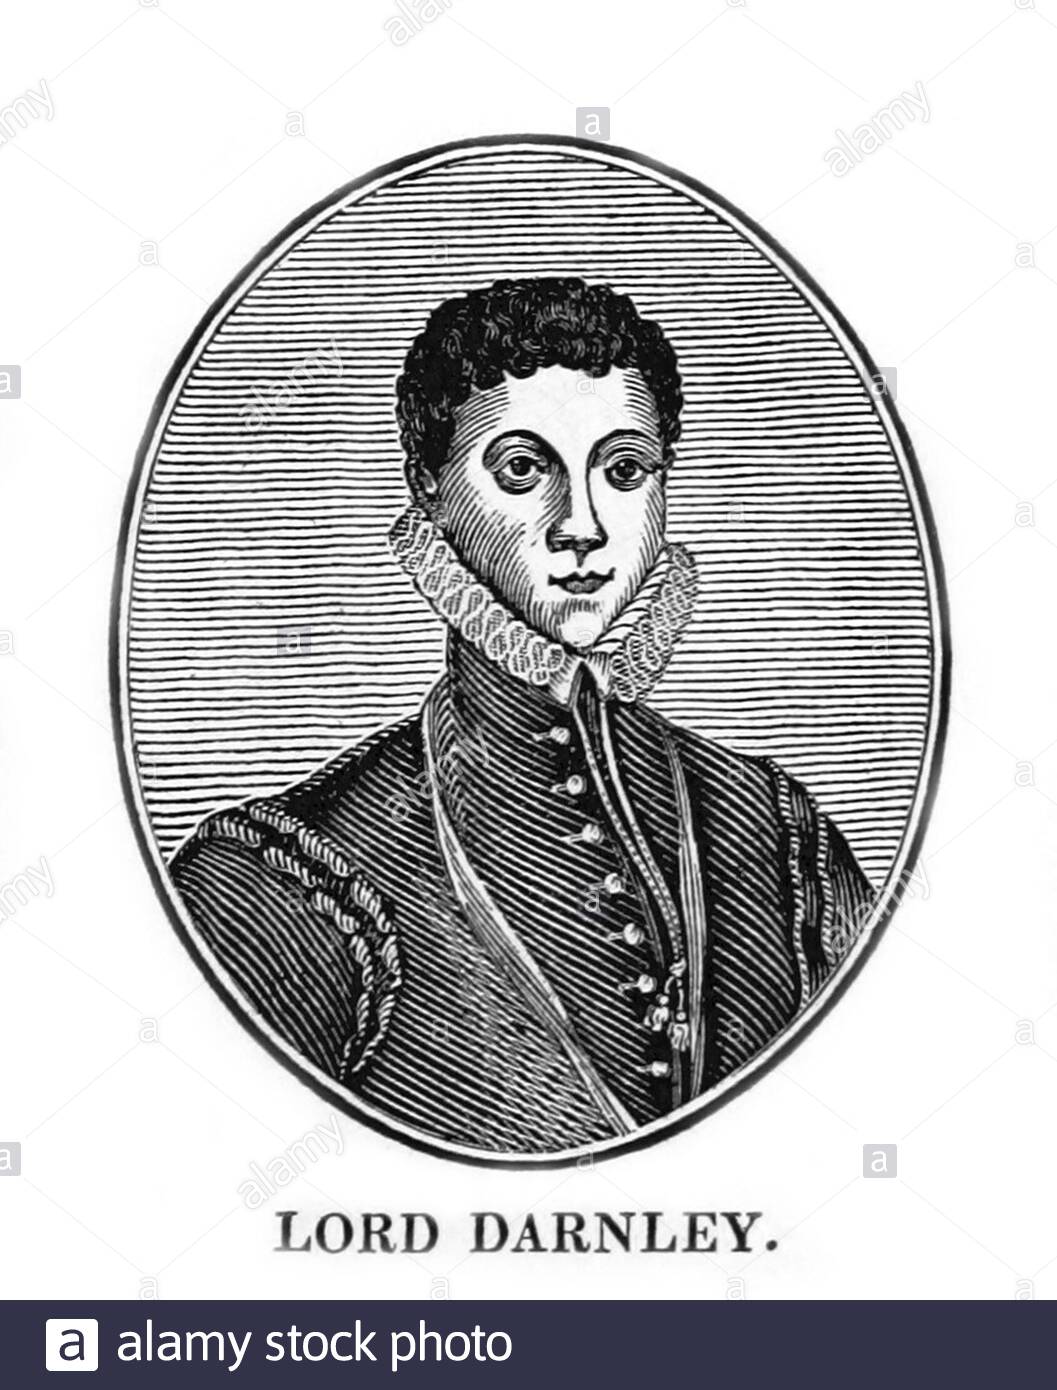 Henry Stuart, Lord Darnley, 1545 – 1567, was the second husband of Mary Queen of Scots, vintage illustration from 1813 Stock Photo